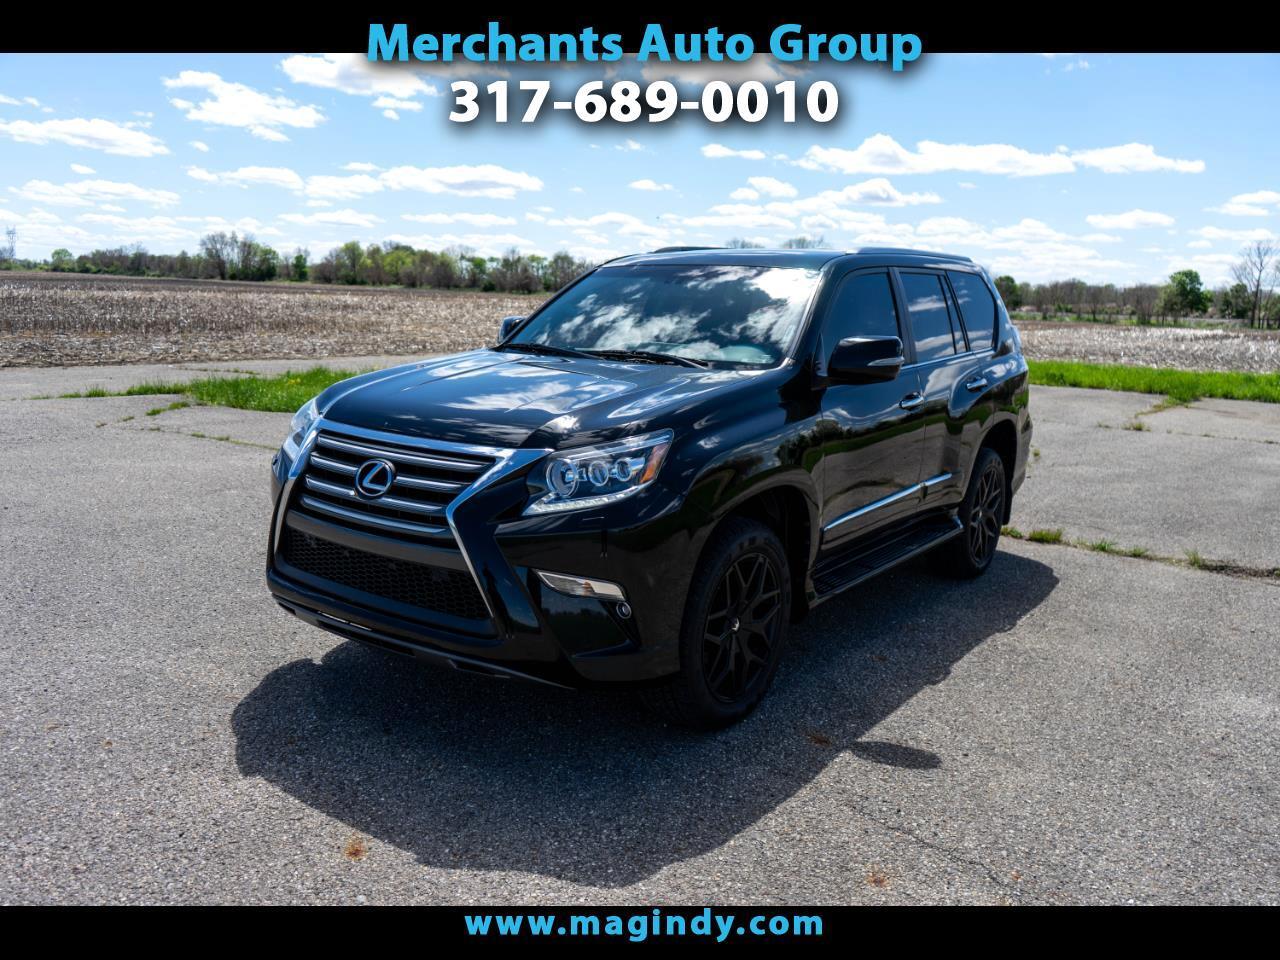 2014 Lexus GX460 for sale in Cicero, IN